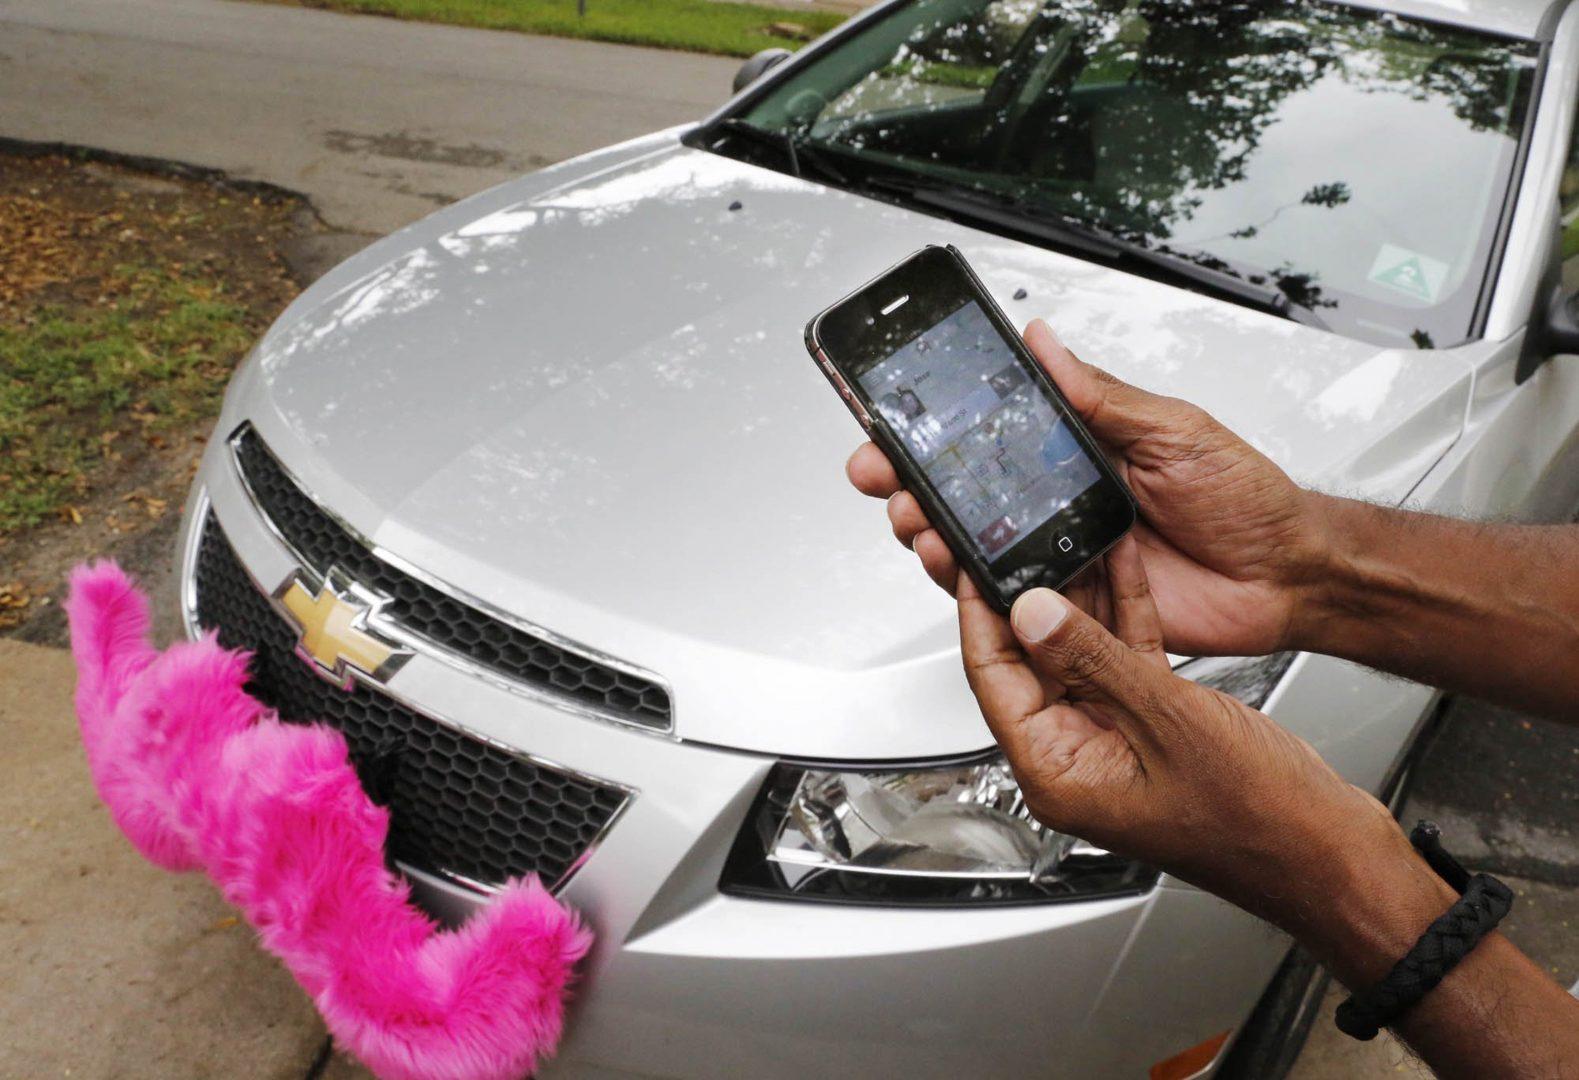 The+Lyft+app+allows+users+to+request+a+ride+in+Miami+on+June+4%2C+2014.+Regulators+across+the+U.S.+and+in+Europe+are+struggling+with+how+to+control+the+digital-dispatch+services+that+have+upended+the+transportation+business.+%28Jose+A.+Iglesias%2FMiami+Herald%2FMCT%29